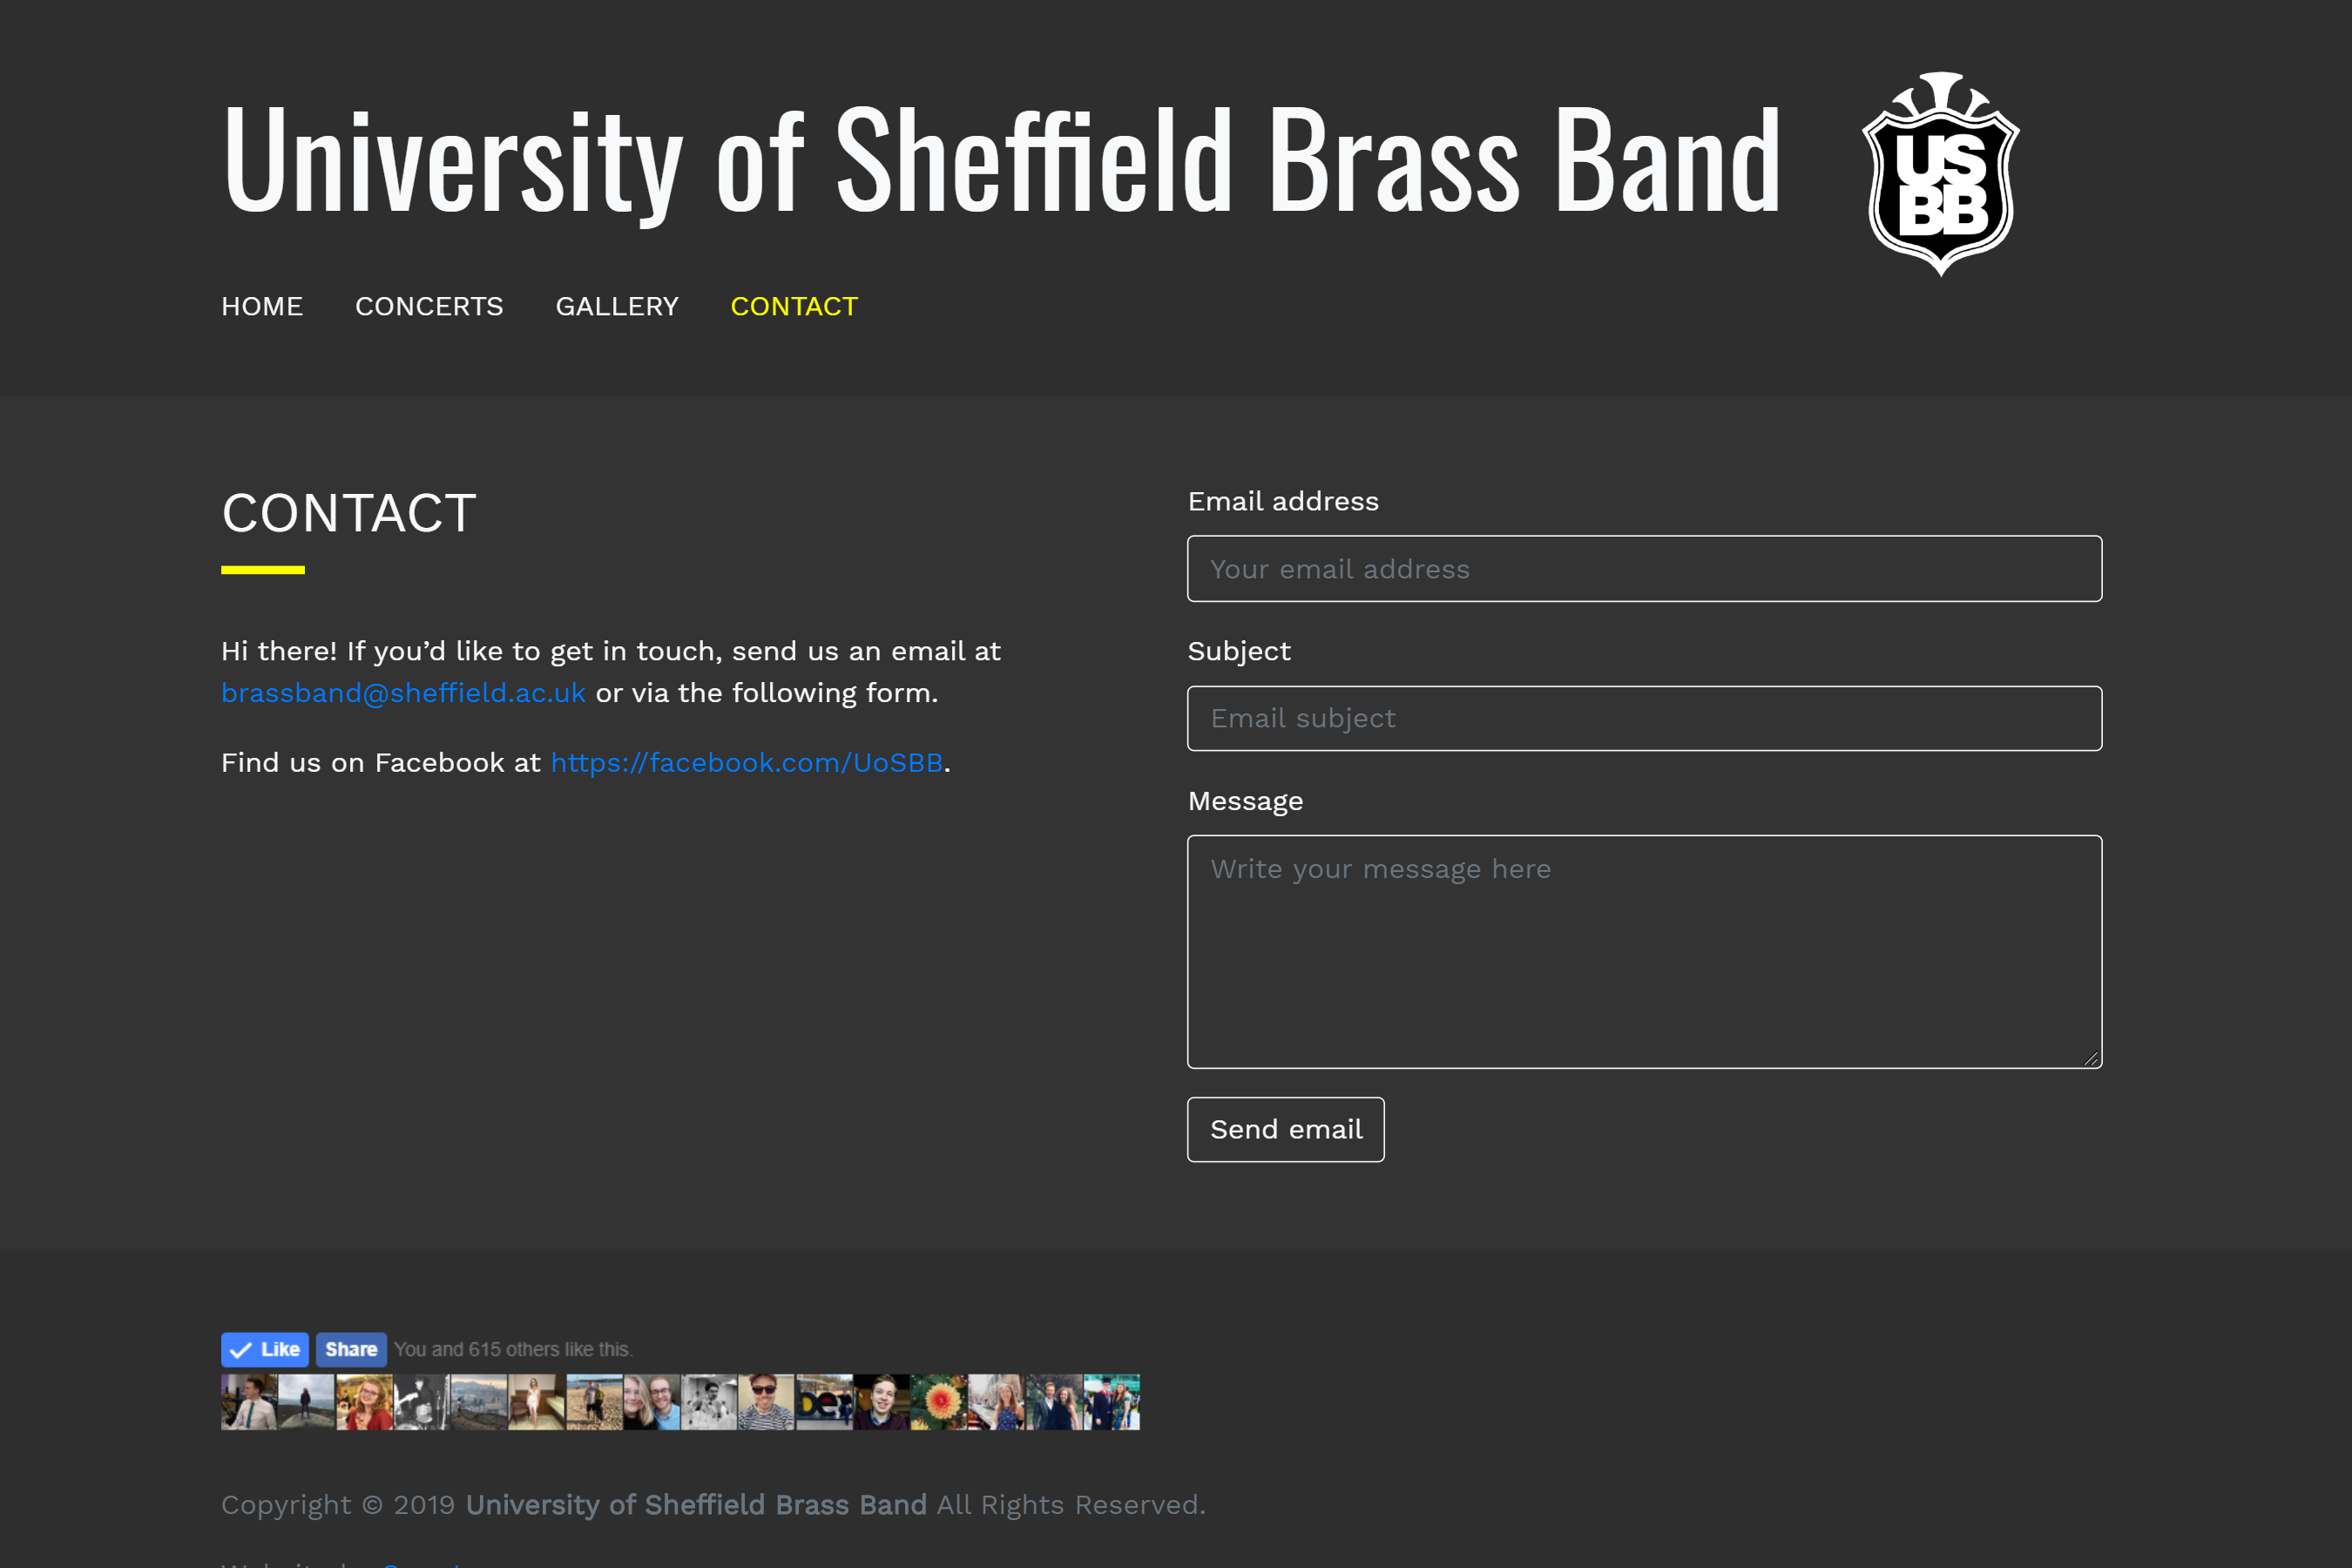 Screenshot of the contact page of USBB's website